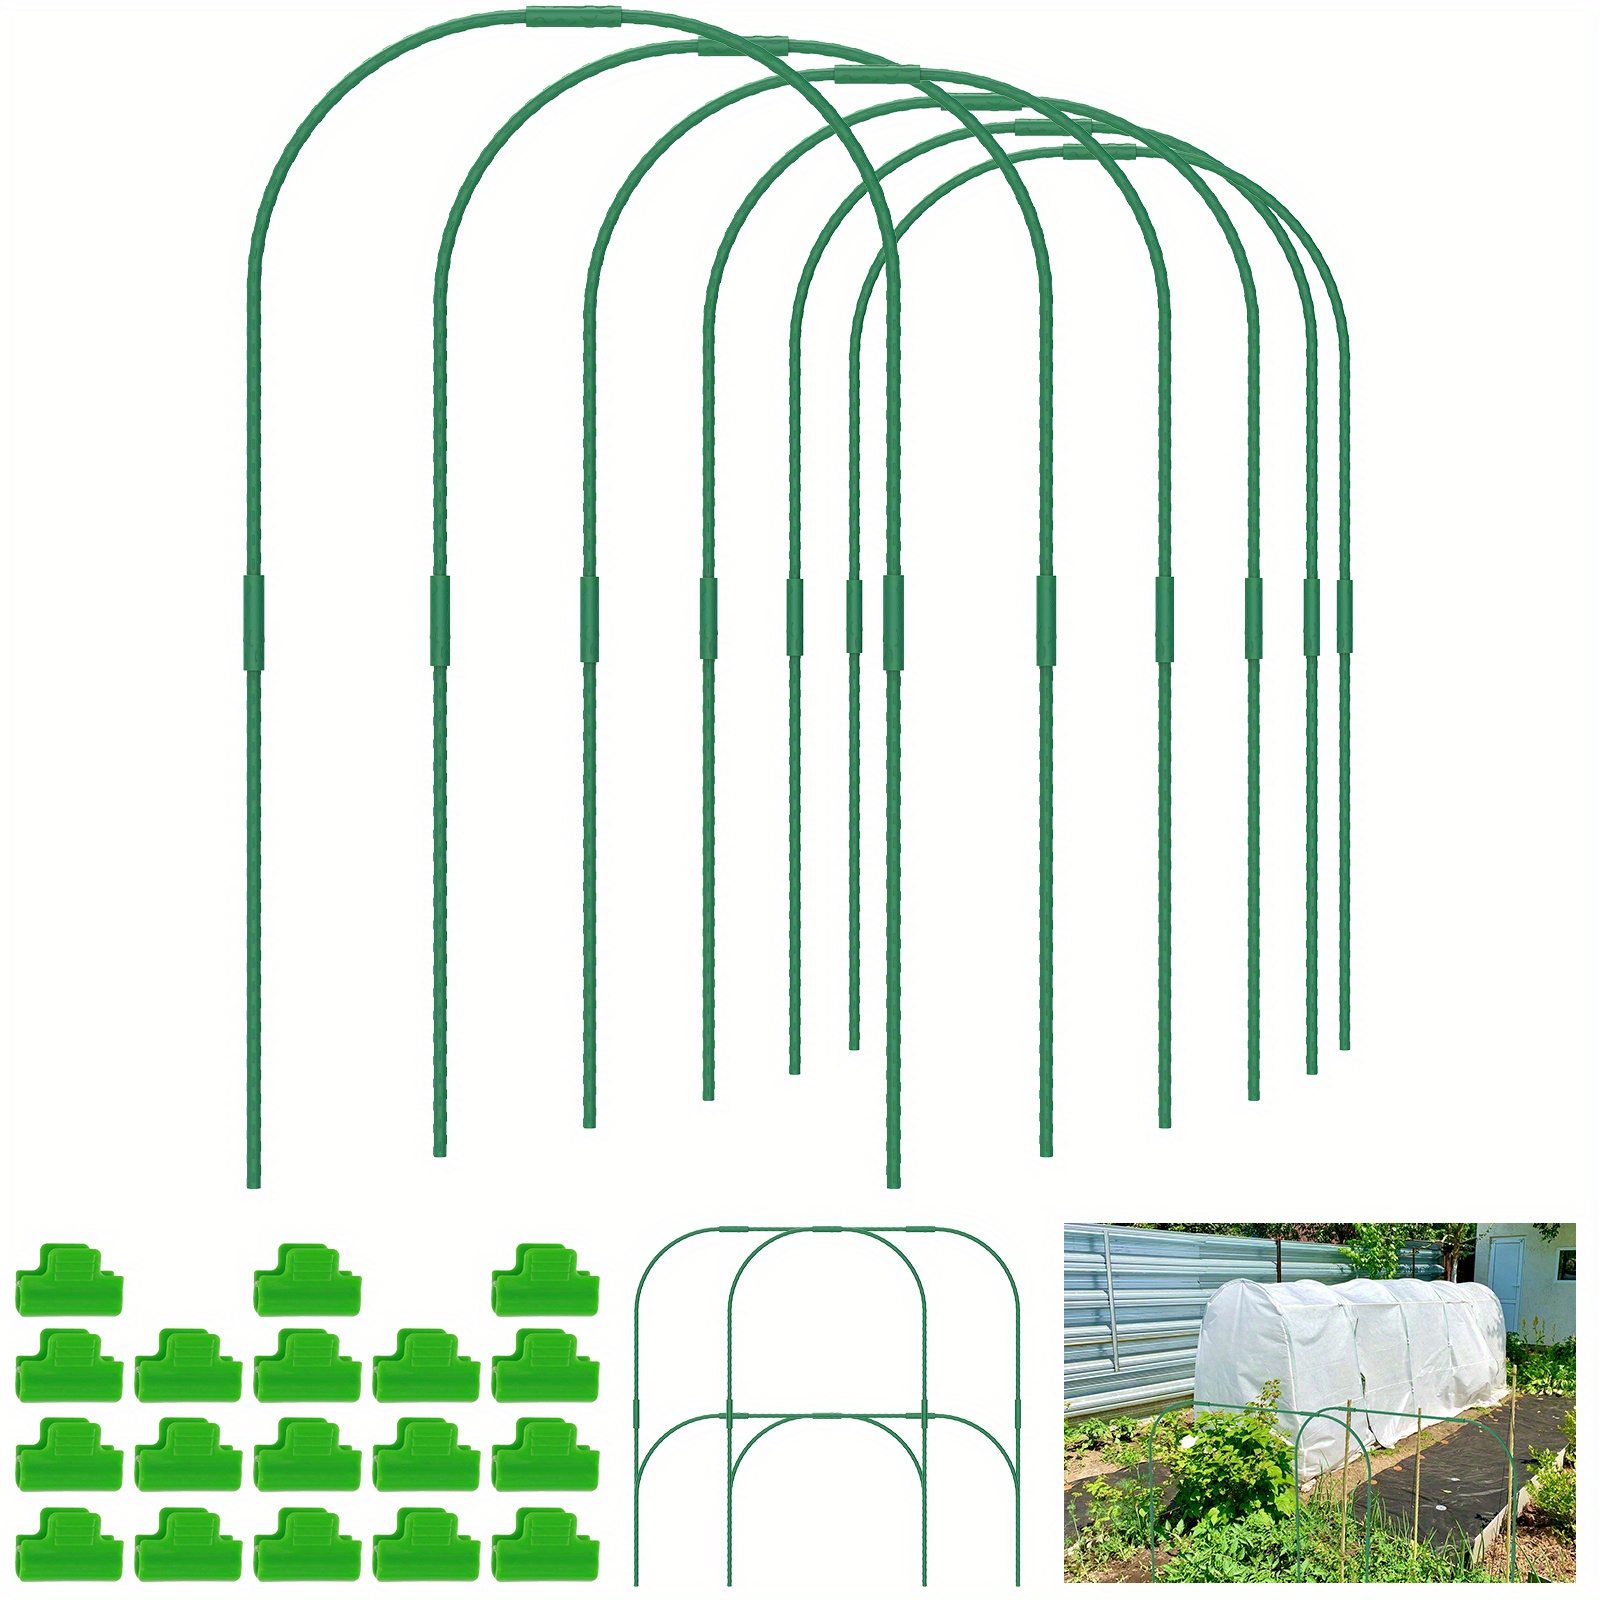 

60pcs Green Garden Hoops Kit, Steel Frame Grow Tunnel Support, Diy Plastic Coated Plant Hoops With Clips, Durable Fiberglass Outdoor Plant Support For Row Covers & Netting, 14.96in/38cm & 20in/50cm